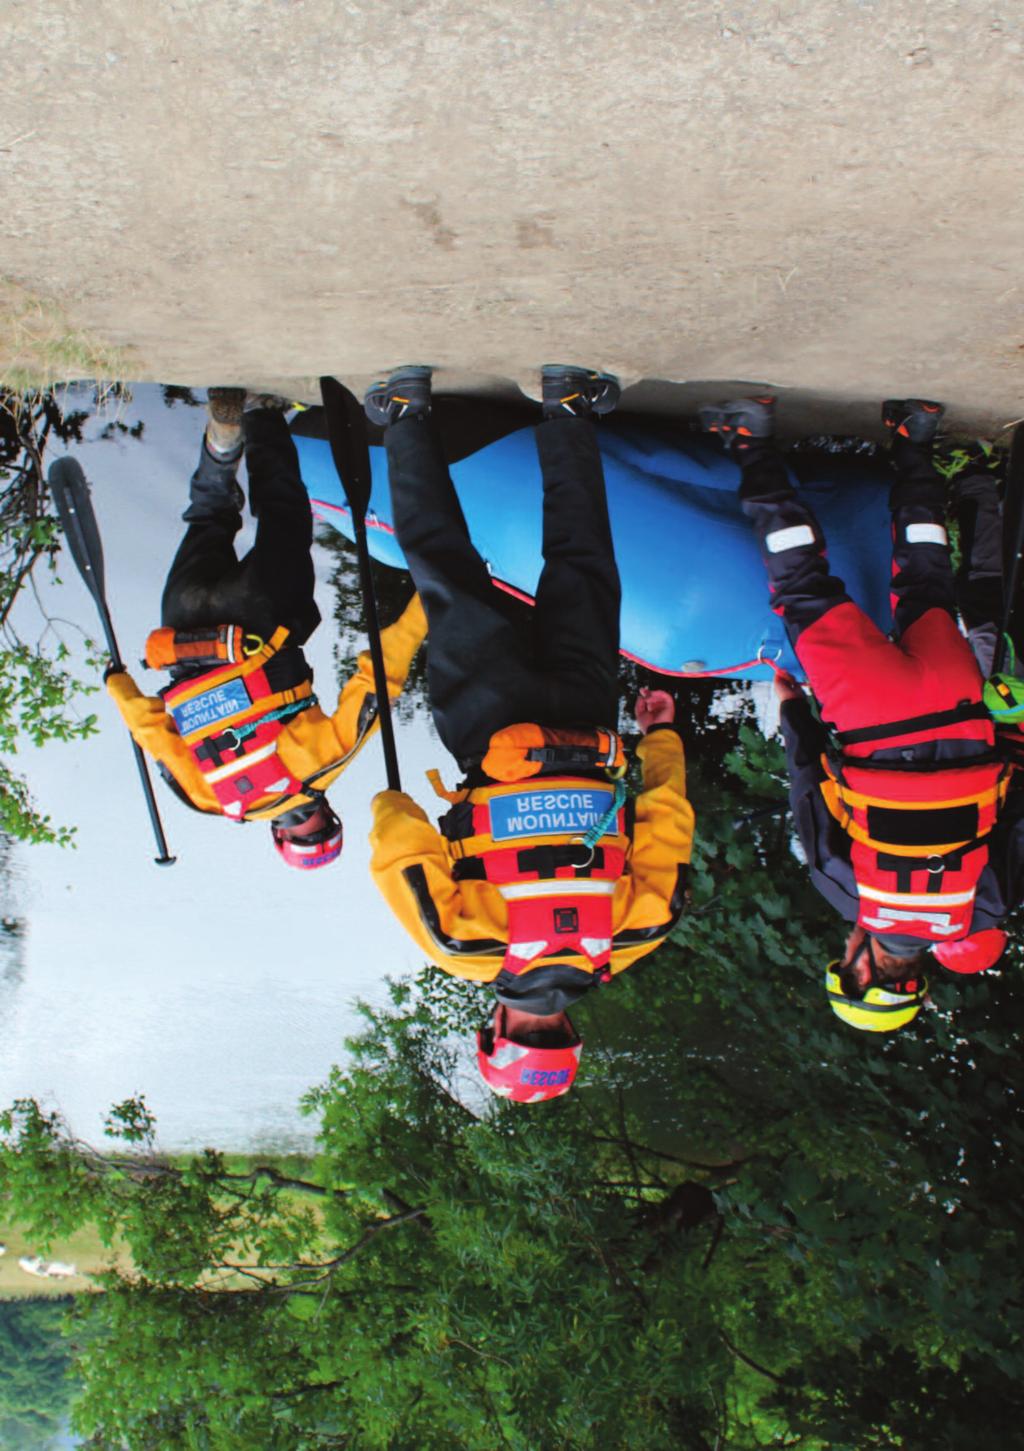 Plas Menai is one of the leading providers of water rescue and safety training in the UK.